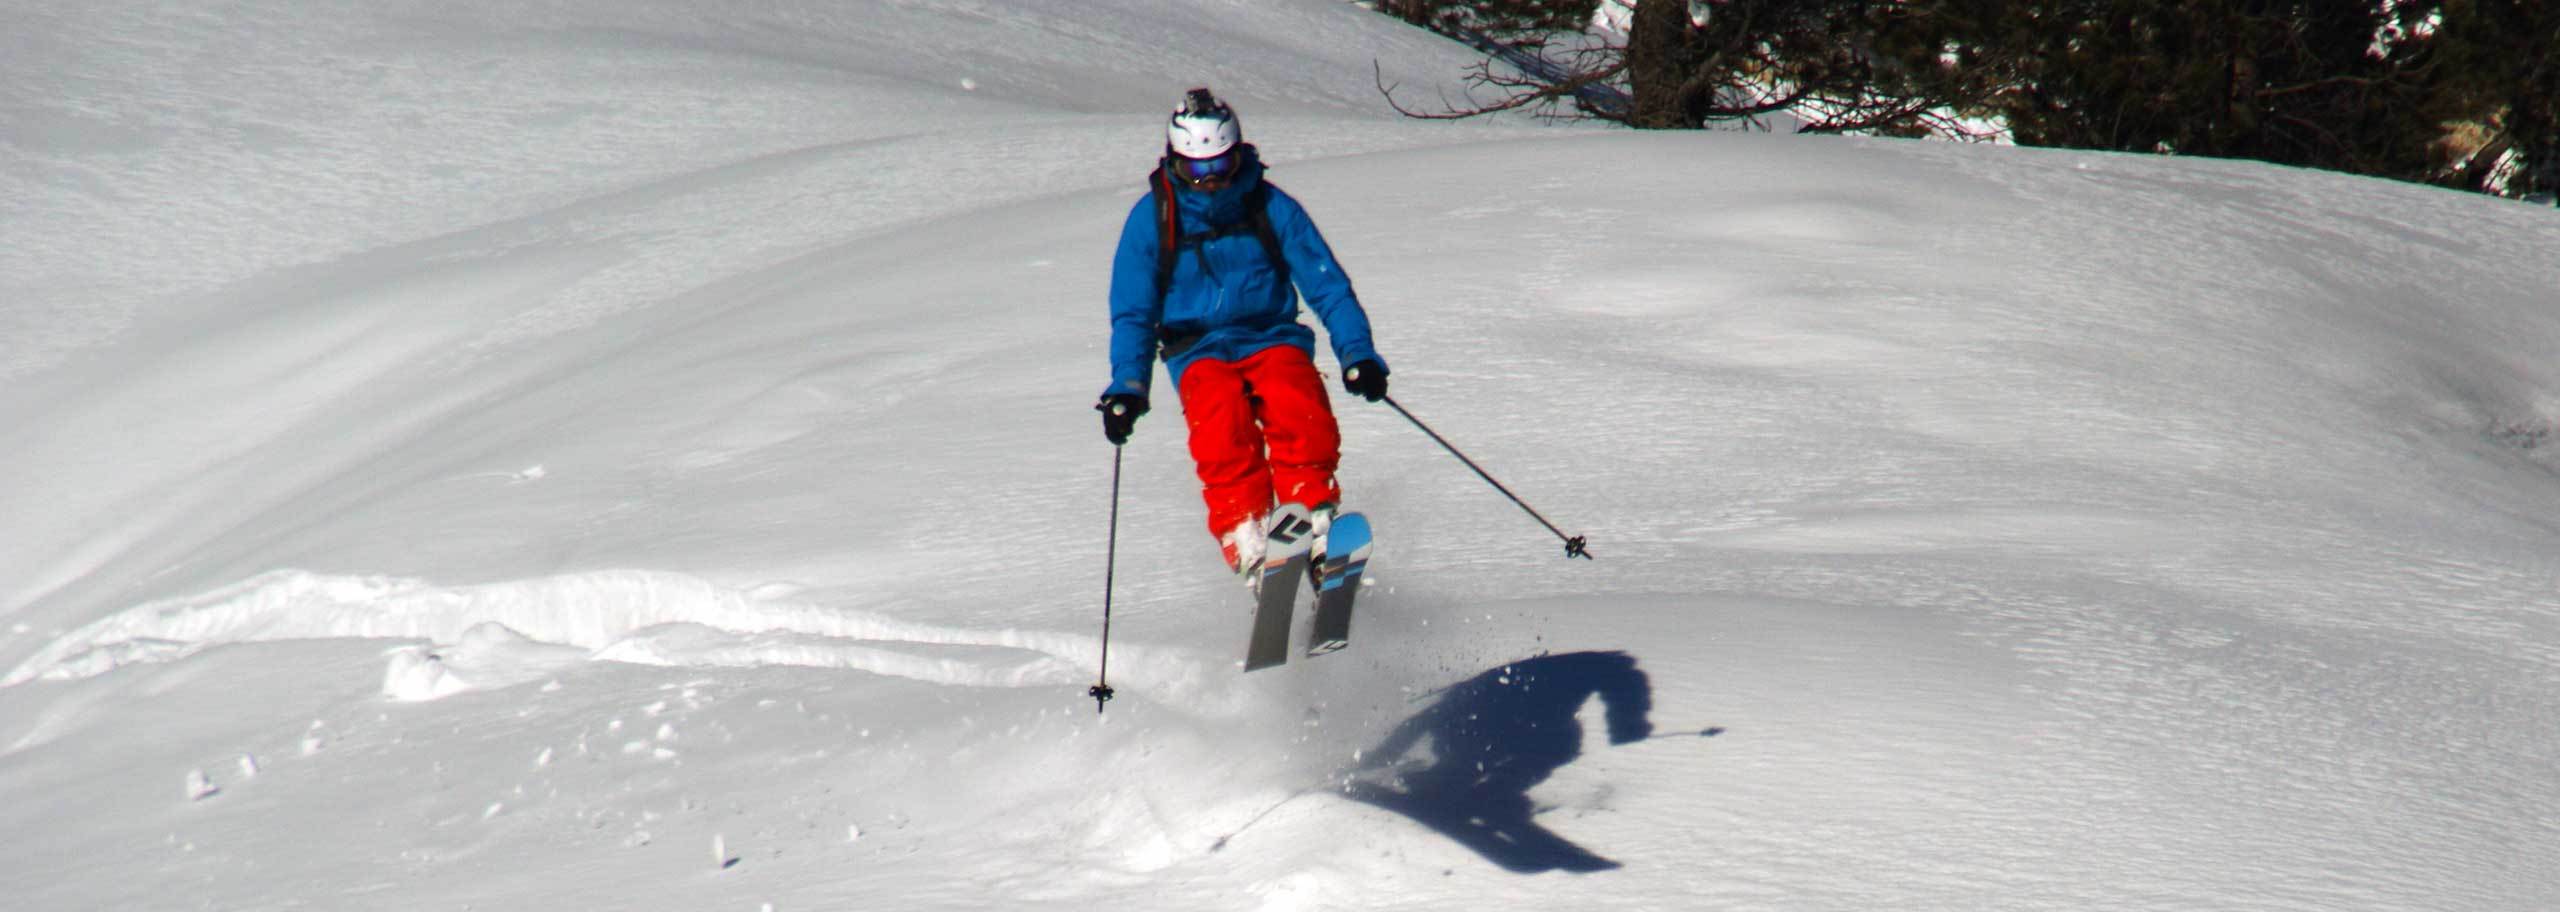 Off-piste Skiing in Champoluc, Guided Freeride Skiing